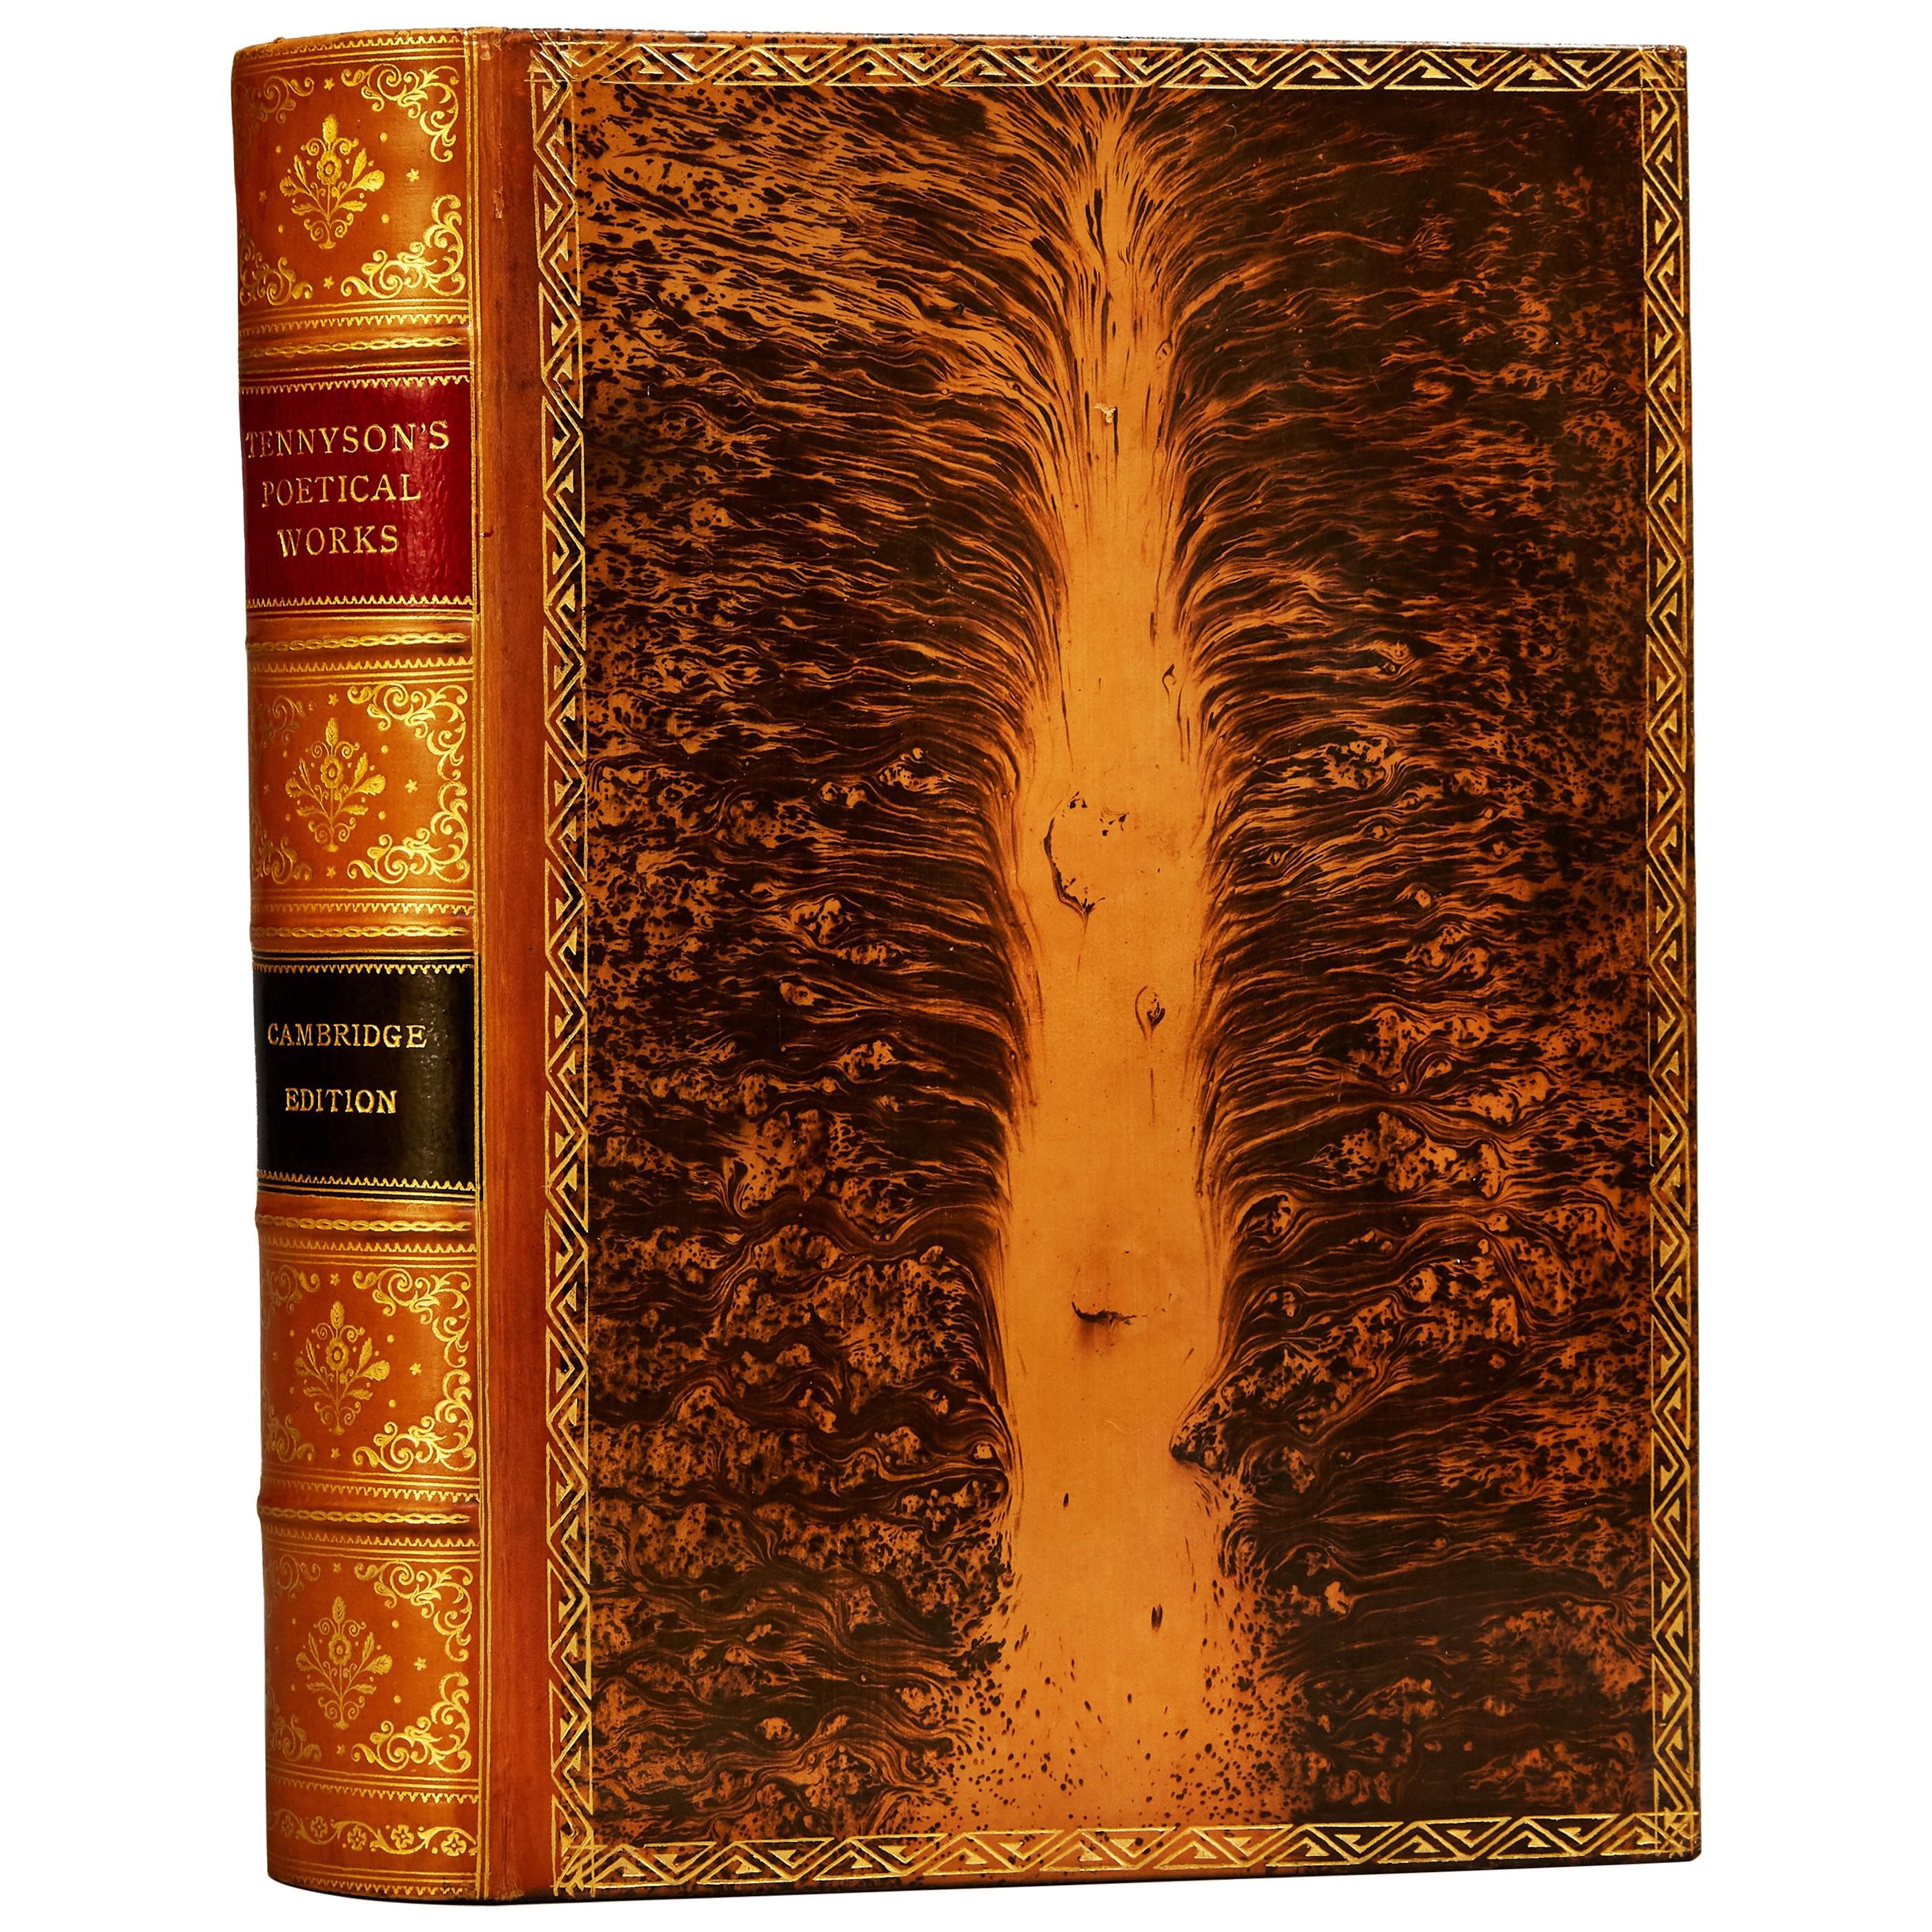 Lord Tennyson, The Poetic and Dramatic Works